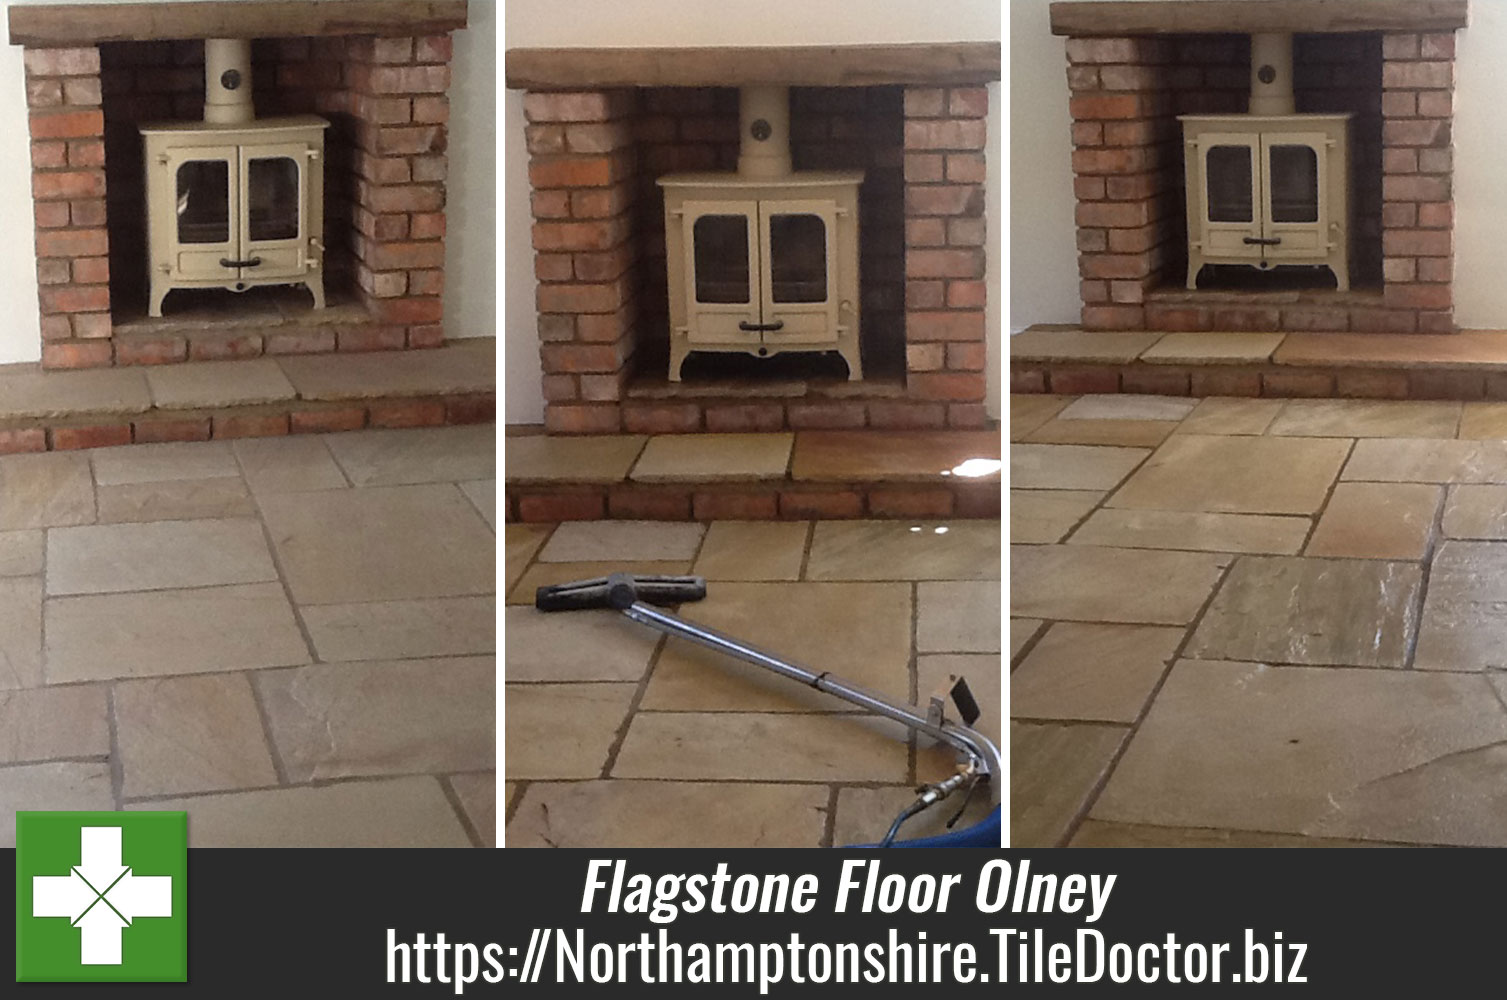 Cleaning Sandstone Flagstones with Tile Doctor Pro-Clean in Olney